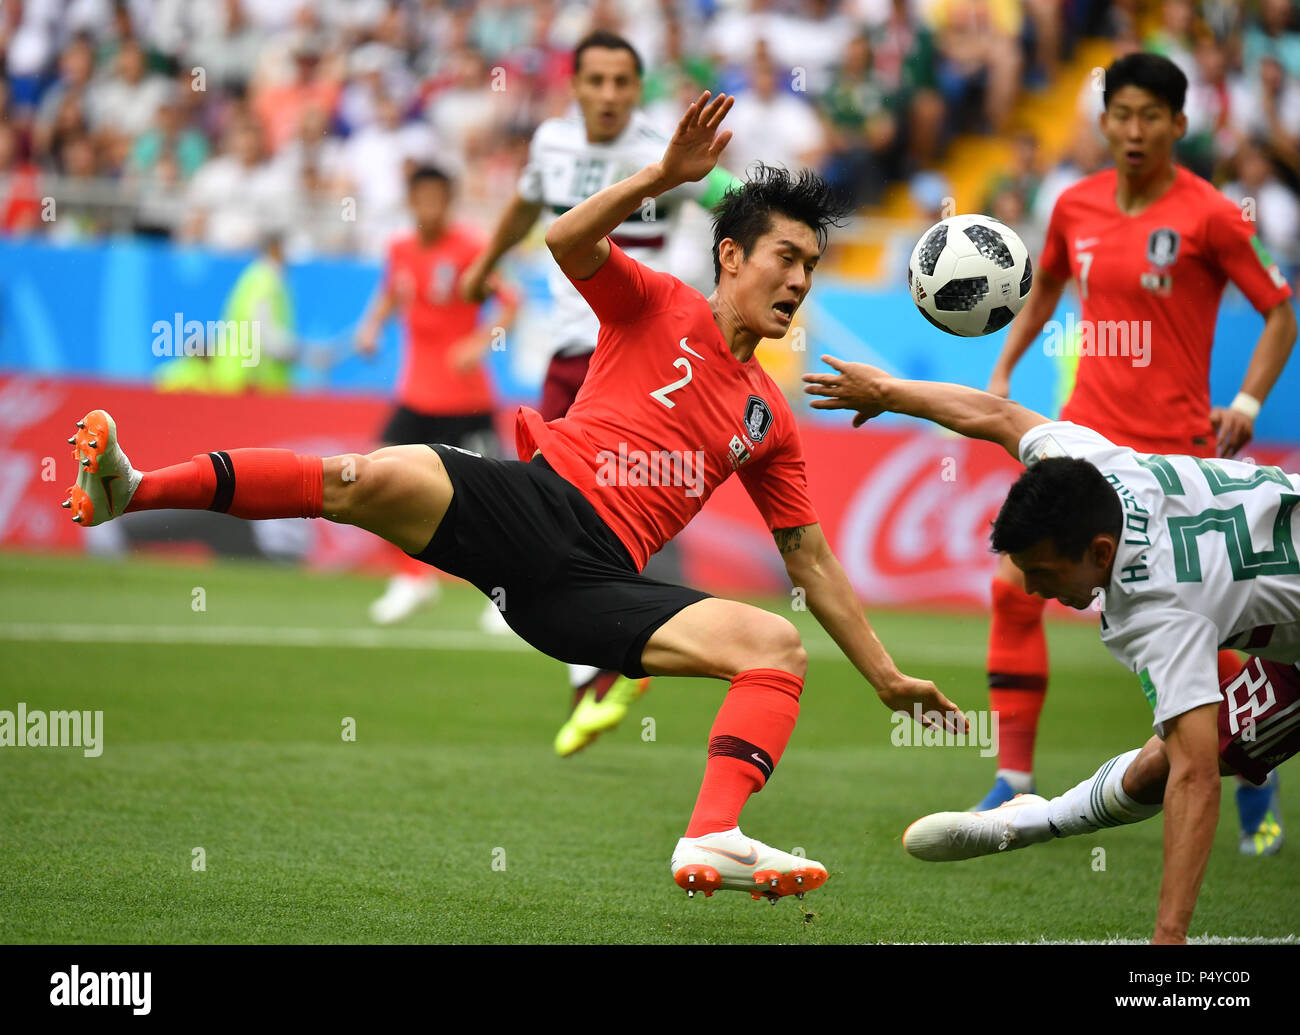 Rostov On Don. 23rd June, 2018. Lee Yong (L) of South Korea competes during the 2018 FIFA World Cup Group F match between South Korea and Mexico in Rostov-on-Don, Russia, June 23, 2018. Credit: Li Ga/Xinhua/Alamy Live News Stock Photo